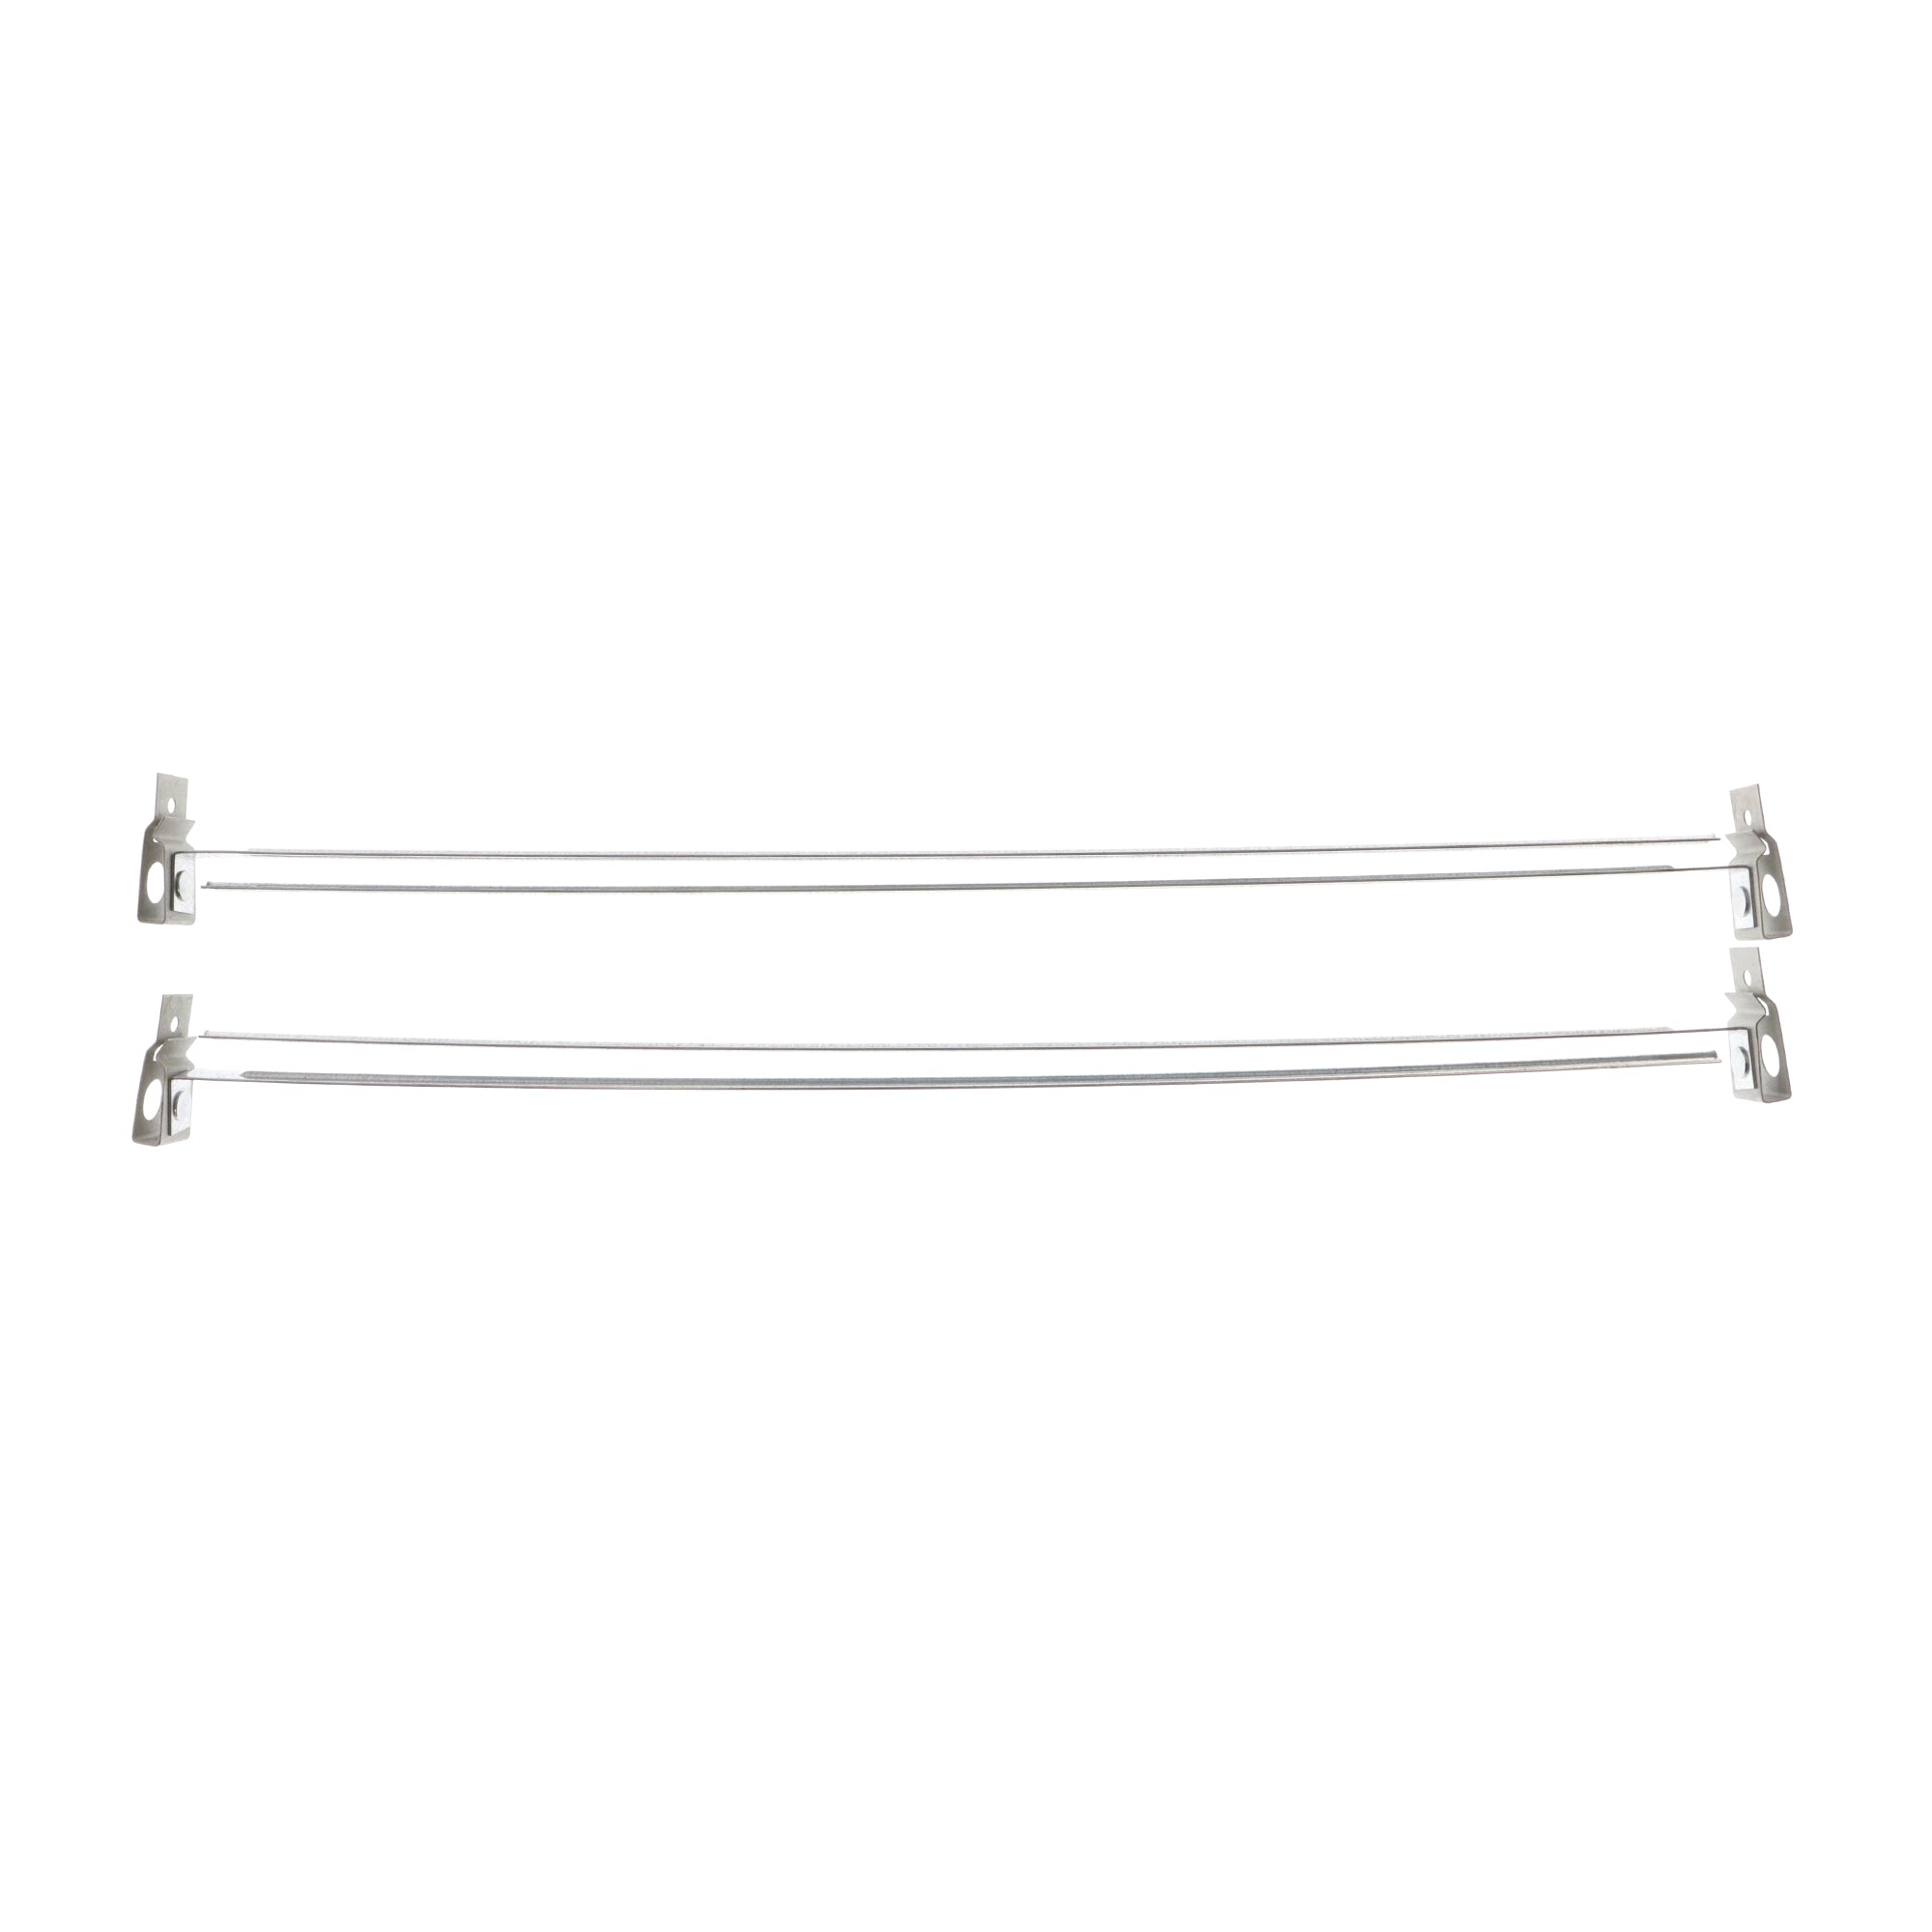 Erico Caddy Cadwal, CADDY ERICO 517B T-GRID RECESSED LIGHT FIXTURE SUSPENSION BAR, (10-PACK)